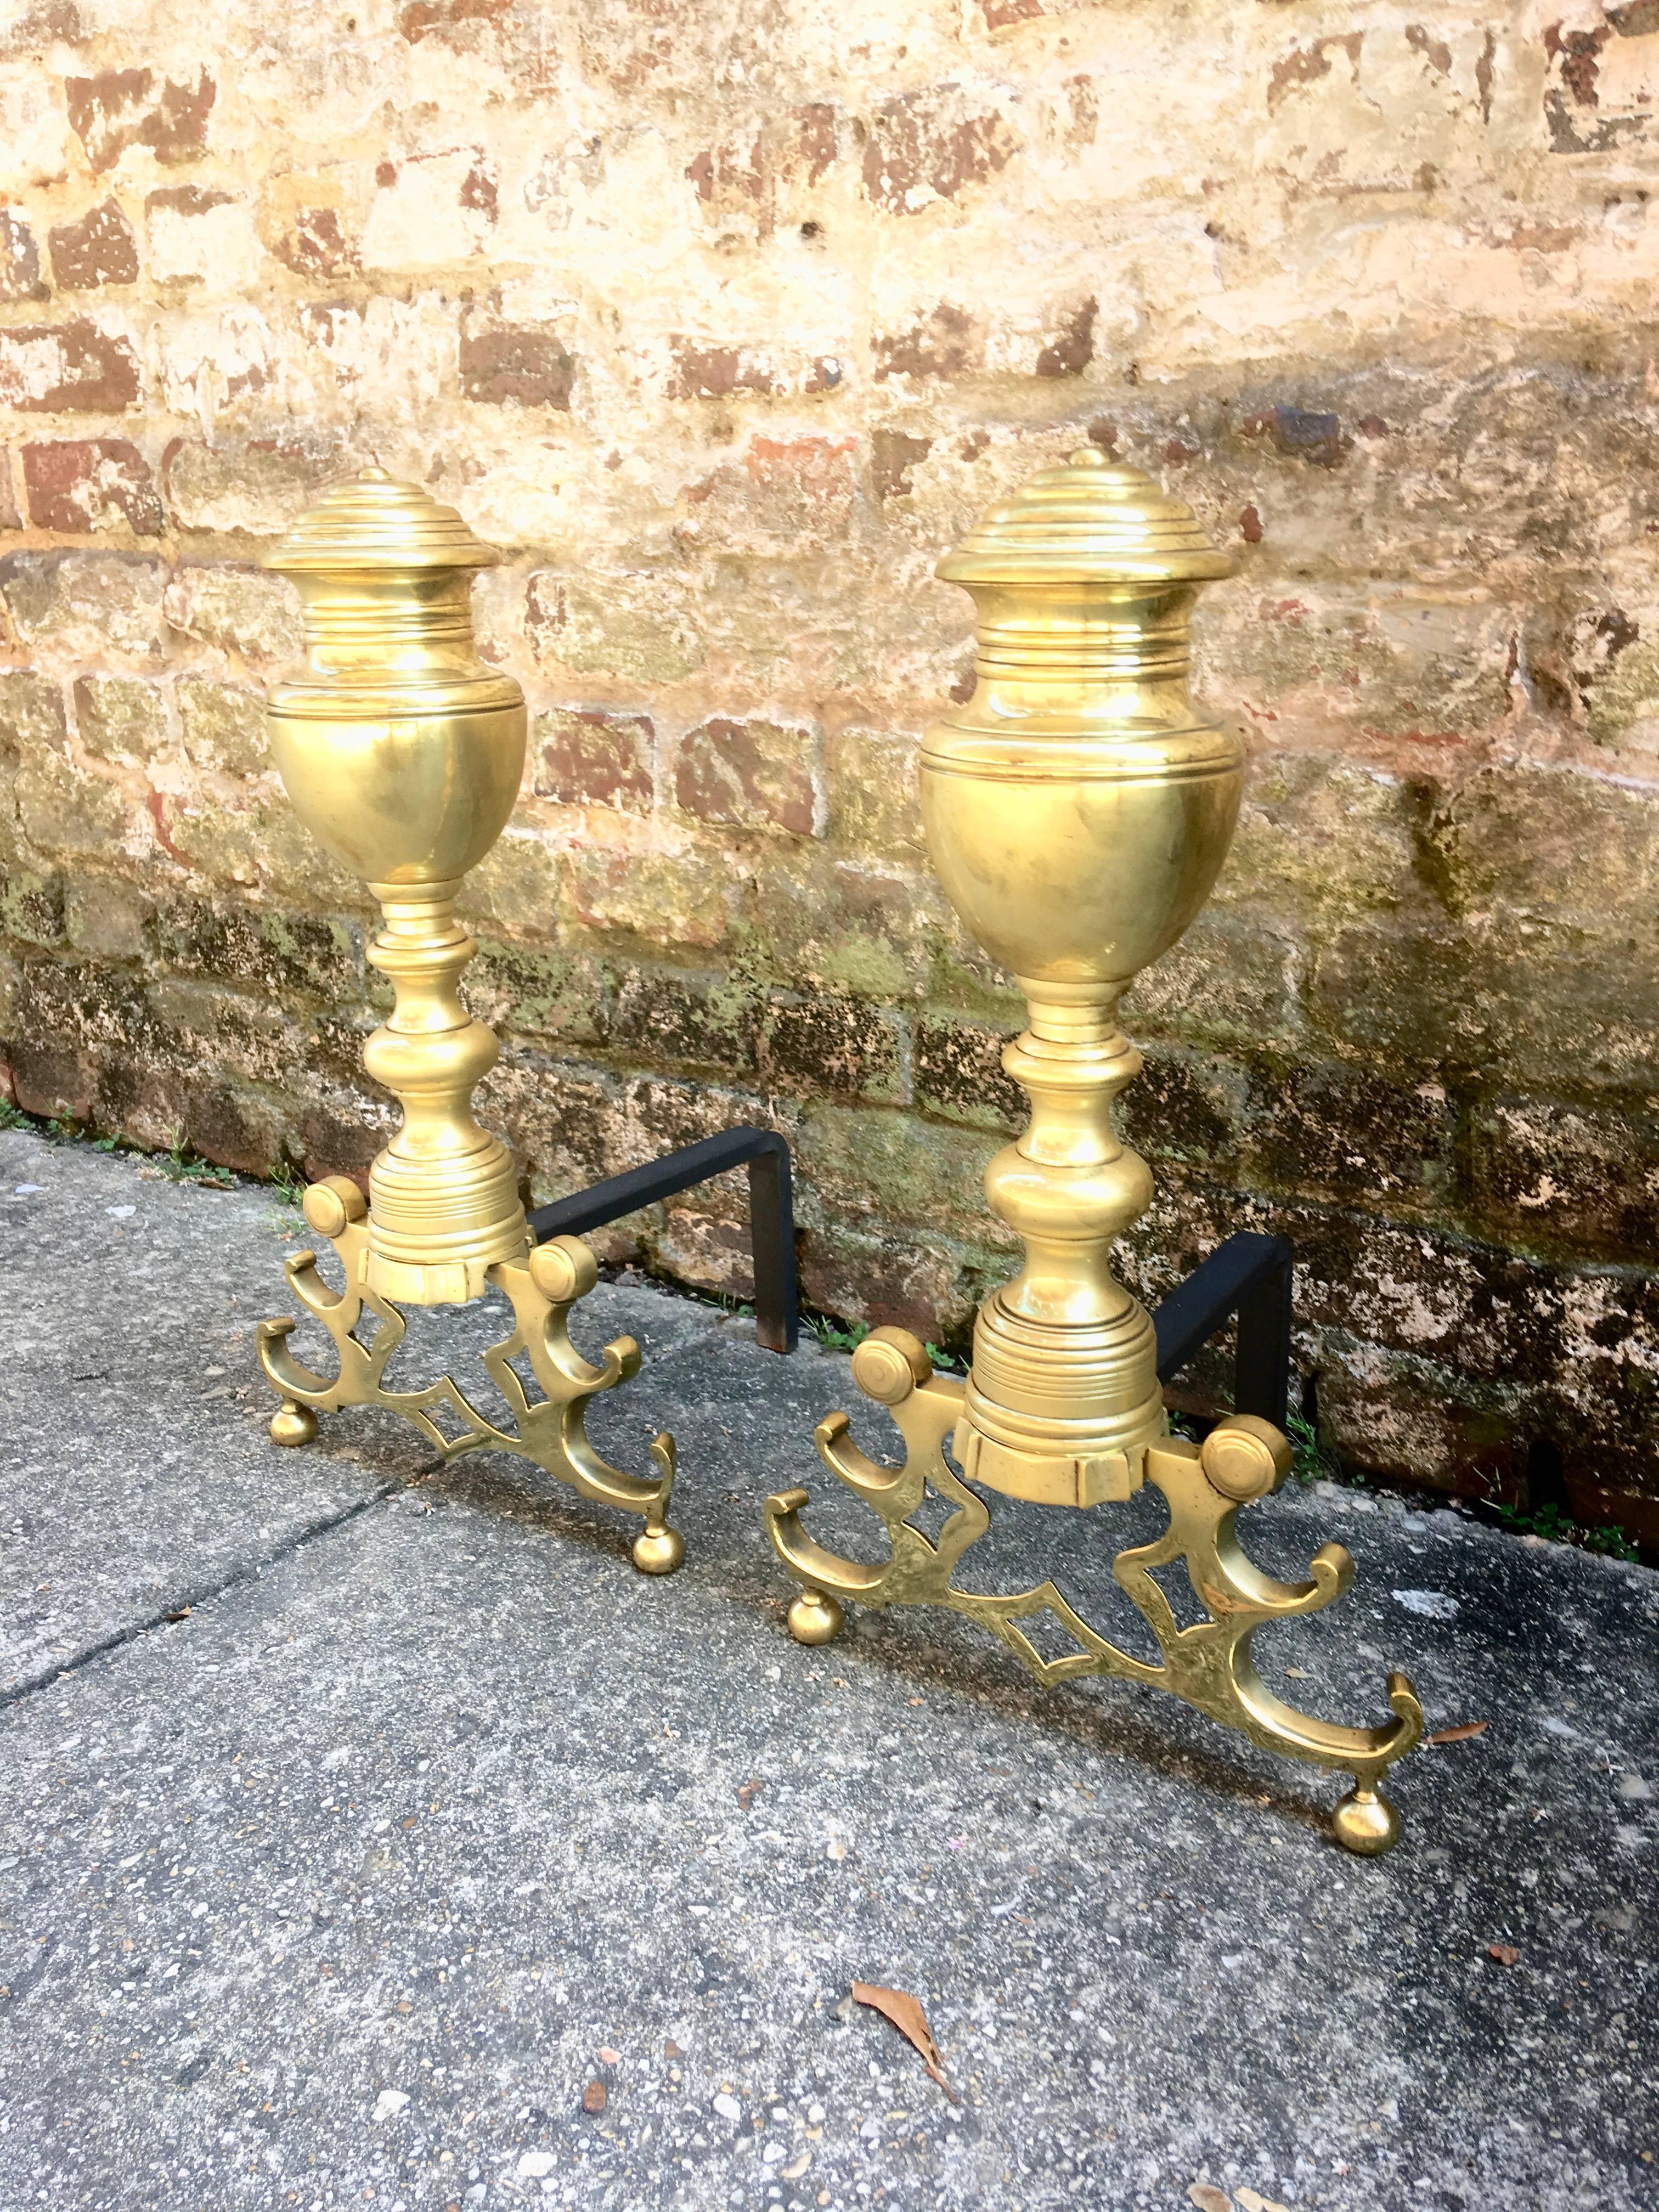 American Urn Top Andirons with Ornate Base In Excellent Condition For Sale In Charleston, SC